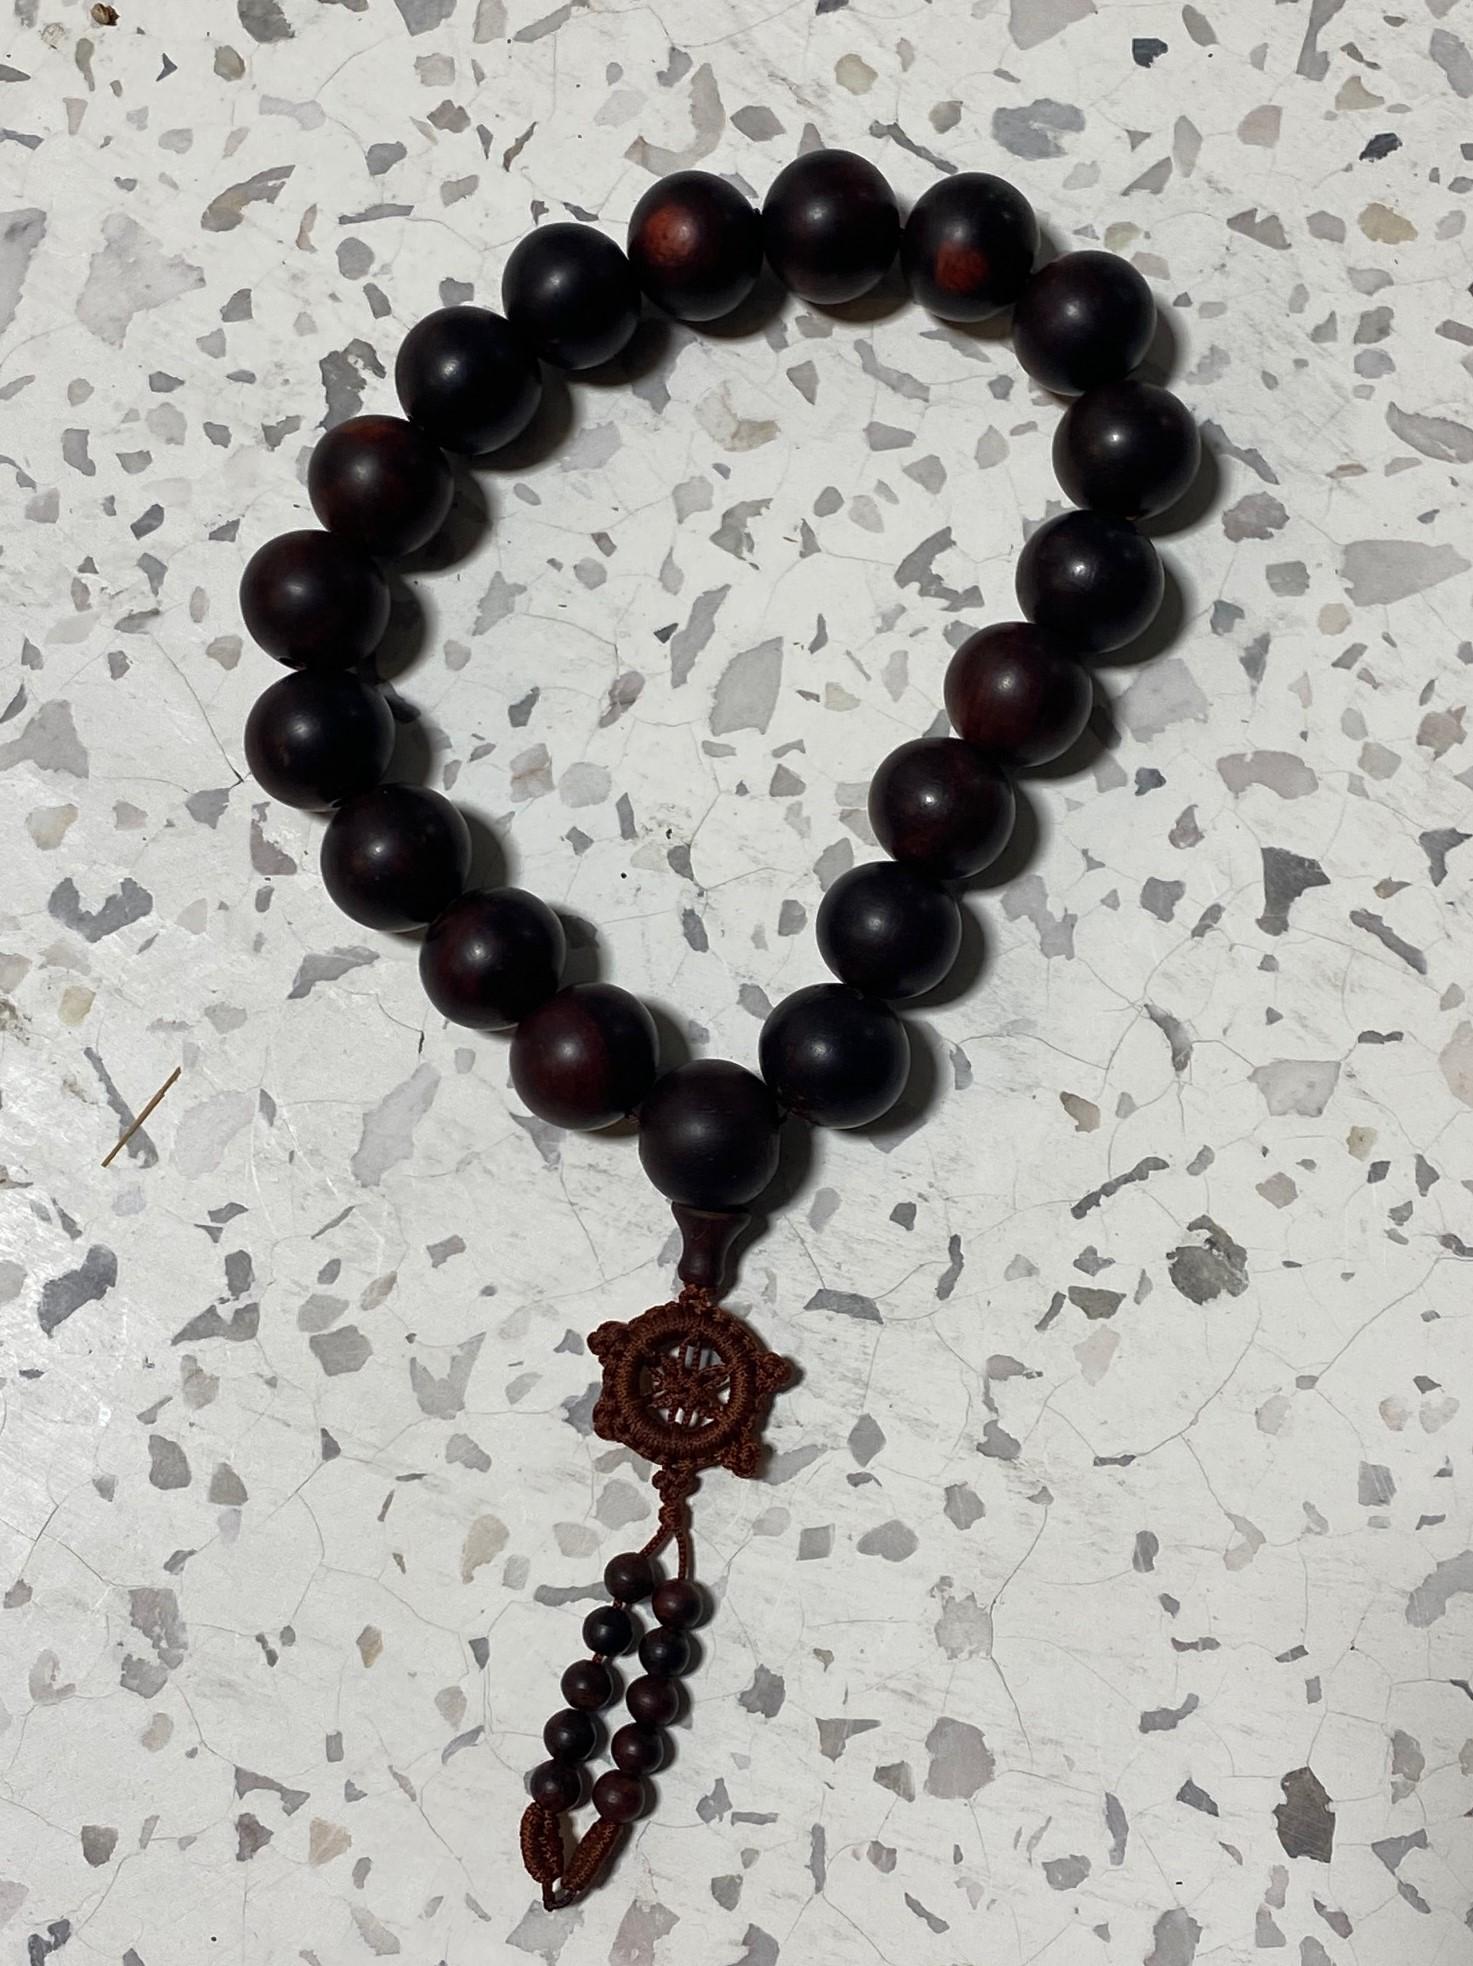 A wonderful Asian (likely Japanese, Chinese or Vietnamese) dark natural Agarwood prayer bead Buddhist rosary bracelet. The piece has a beautiful rich color and glowing organic patina to it. Agarwood beads are used in religious ceremonies as a rosary